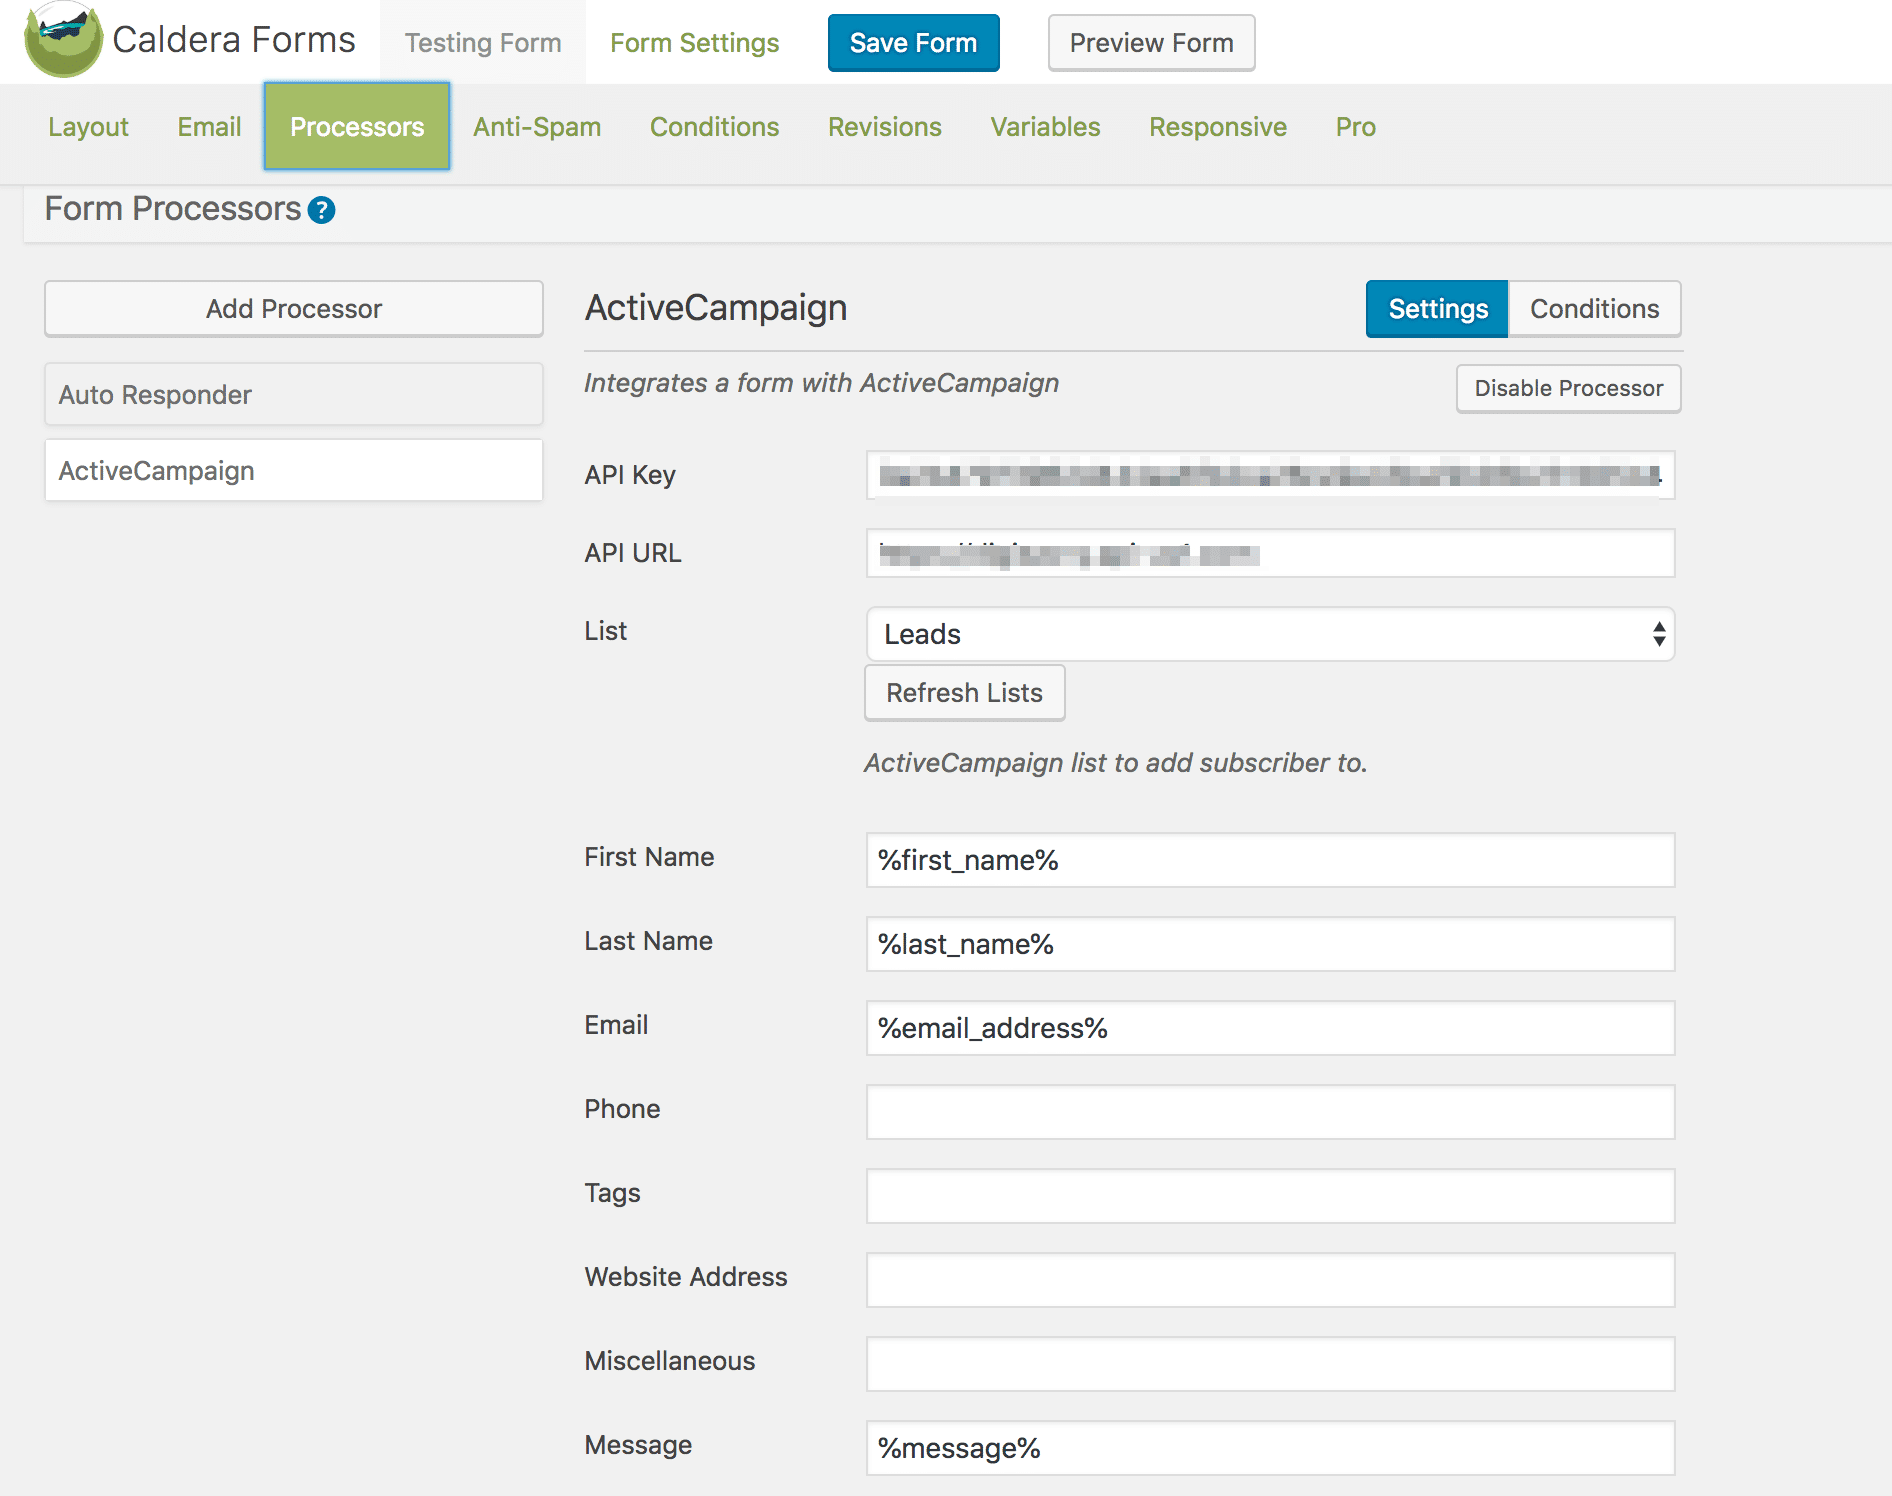 View of Caldera Forms UI, using the ActiveCampaign add-on as a form processor